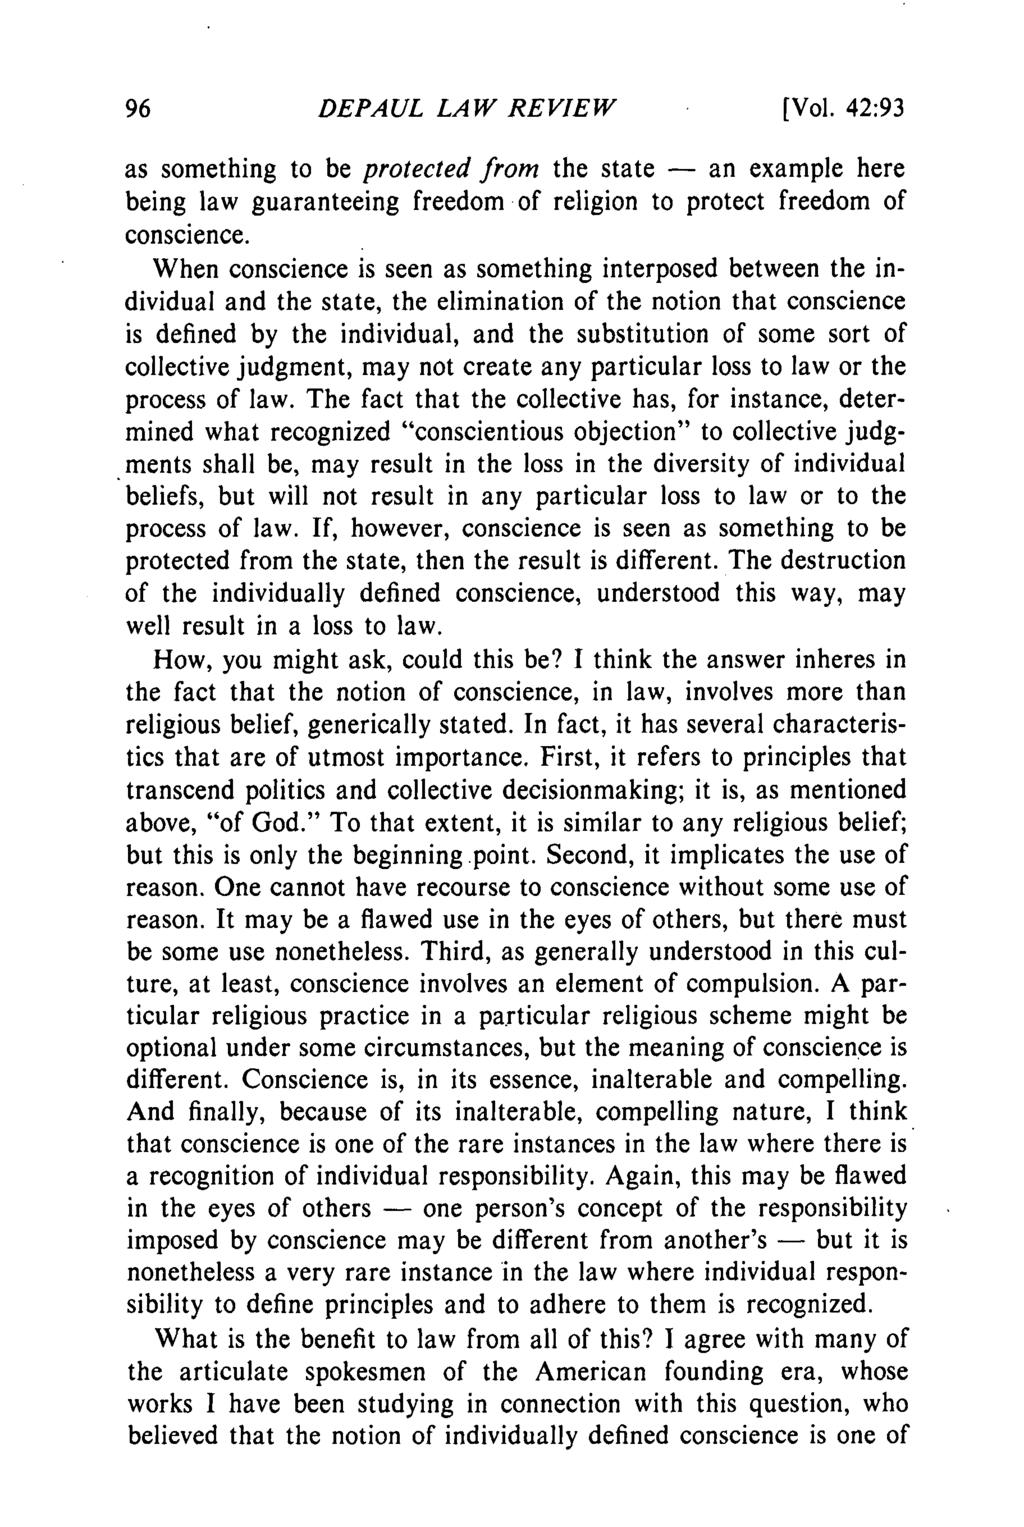 DEPAUL LAW REVIEW [Vol. 42:93 as something to be protected from the state - an example here being law guaranteeing freedom of religion to protect freedom of conscience.